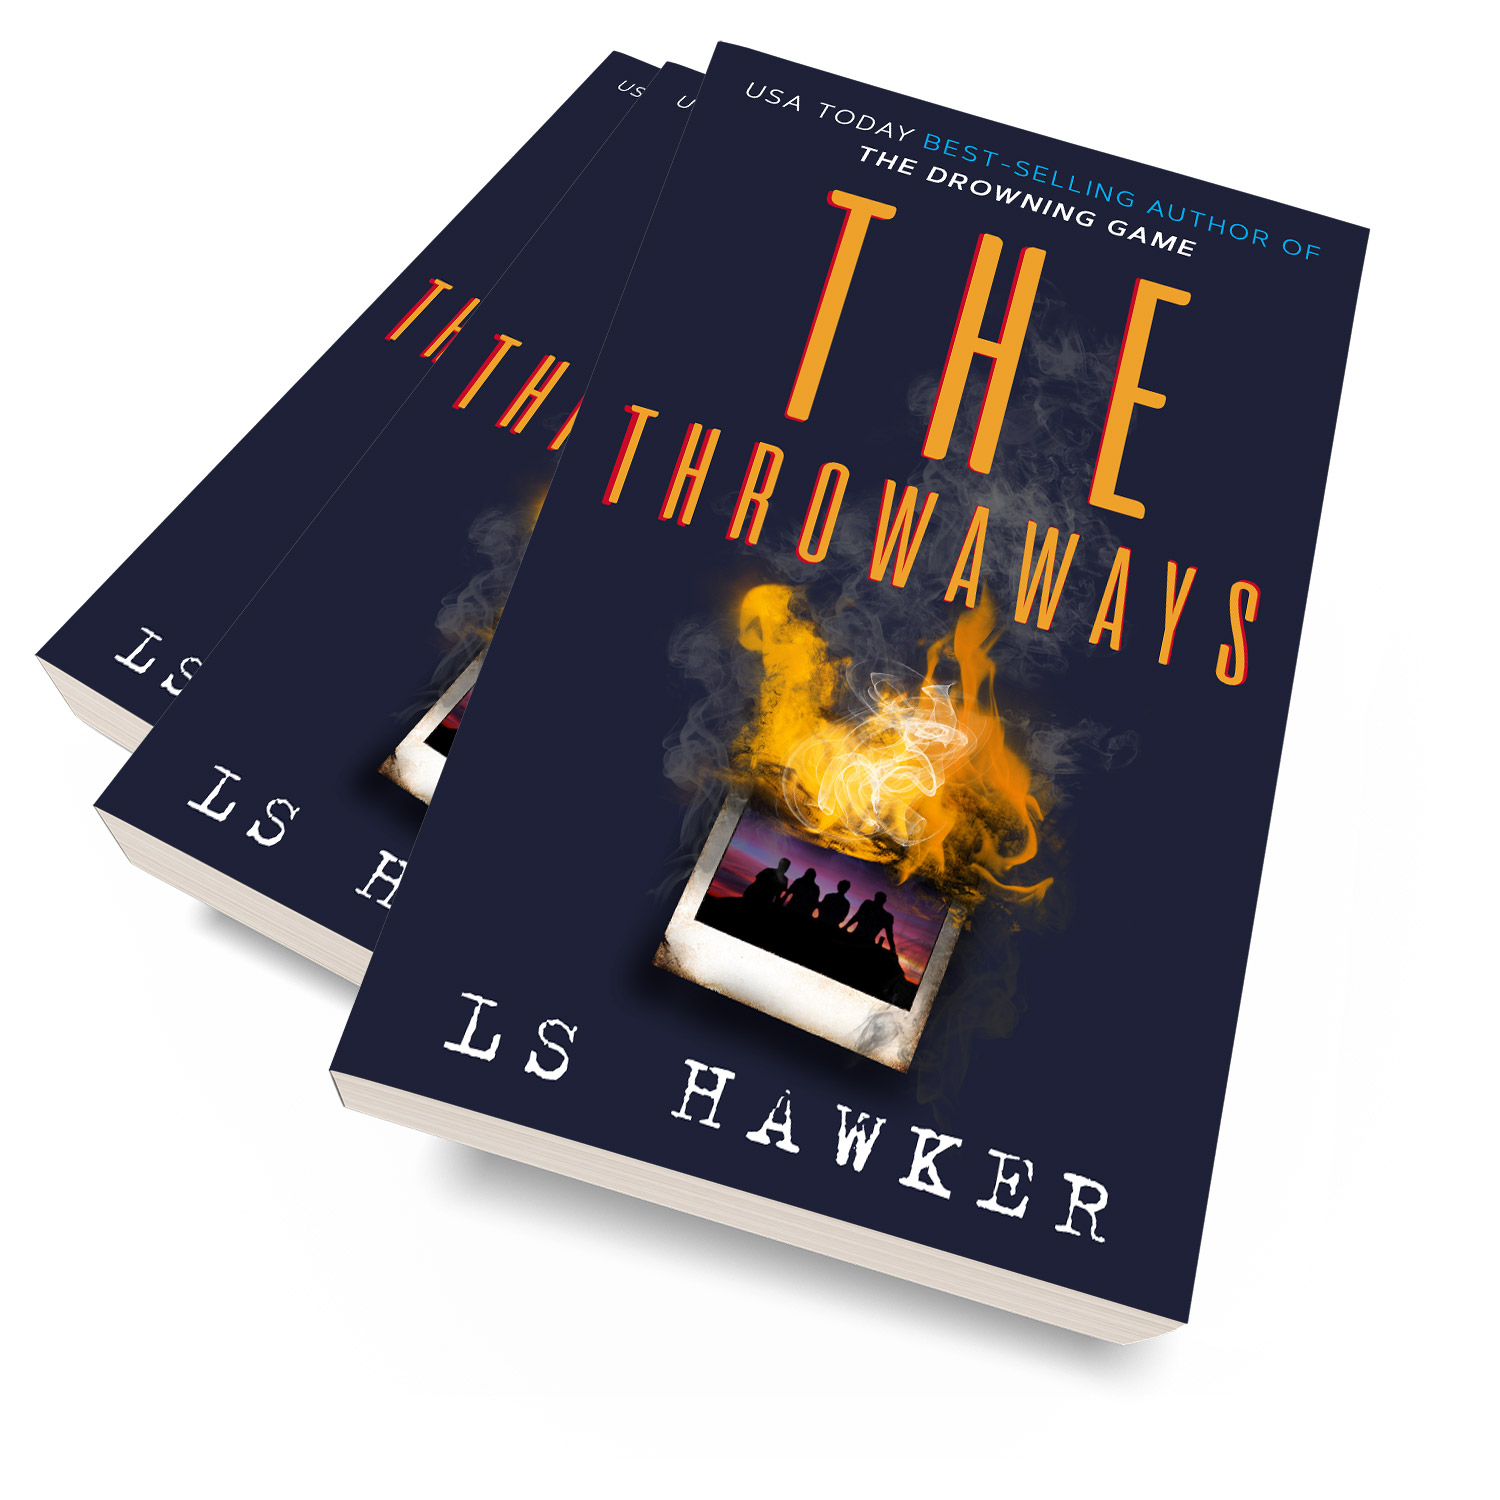 'The Throwaways' is a breakneck, 80s-set conspiracy thriller. The author is LS Hawker. The book cover and interior design are by Mark Thomas. To learn more about what Mark could do for your book, please visit coverness.com.